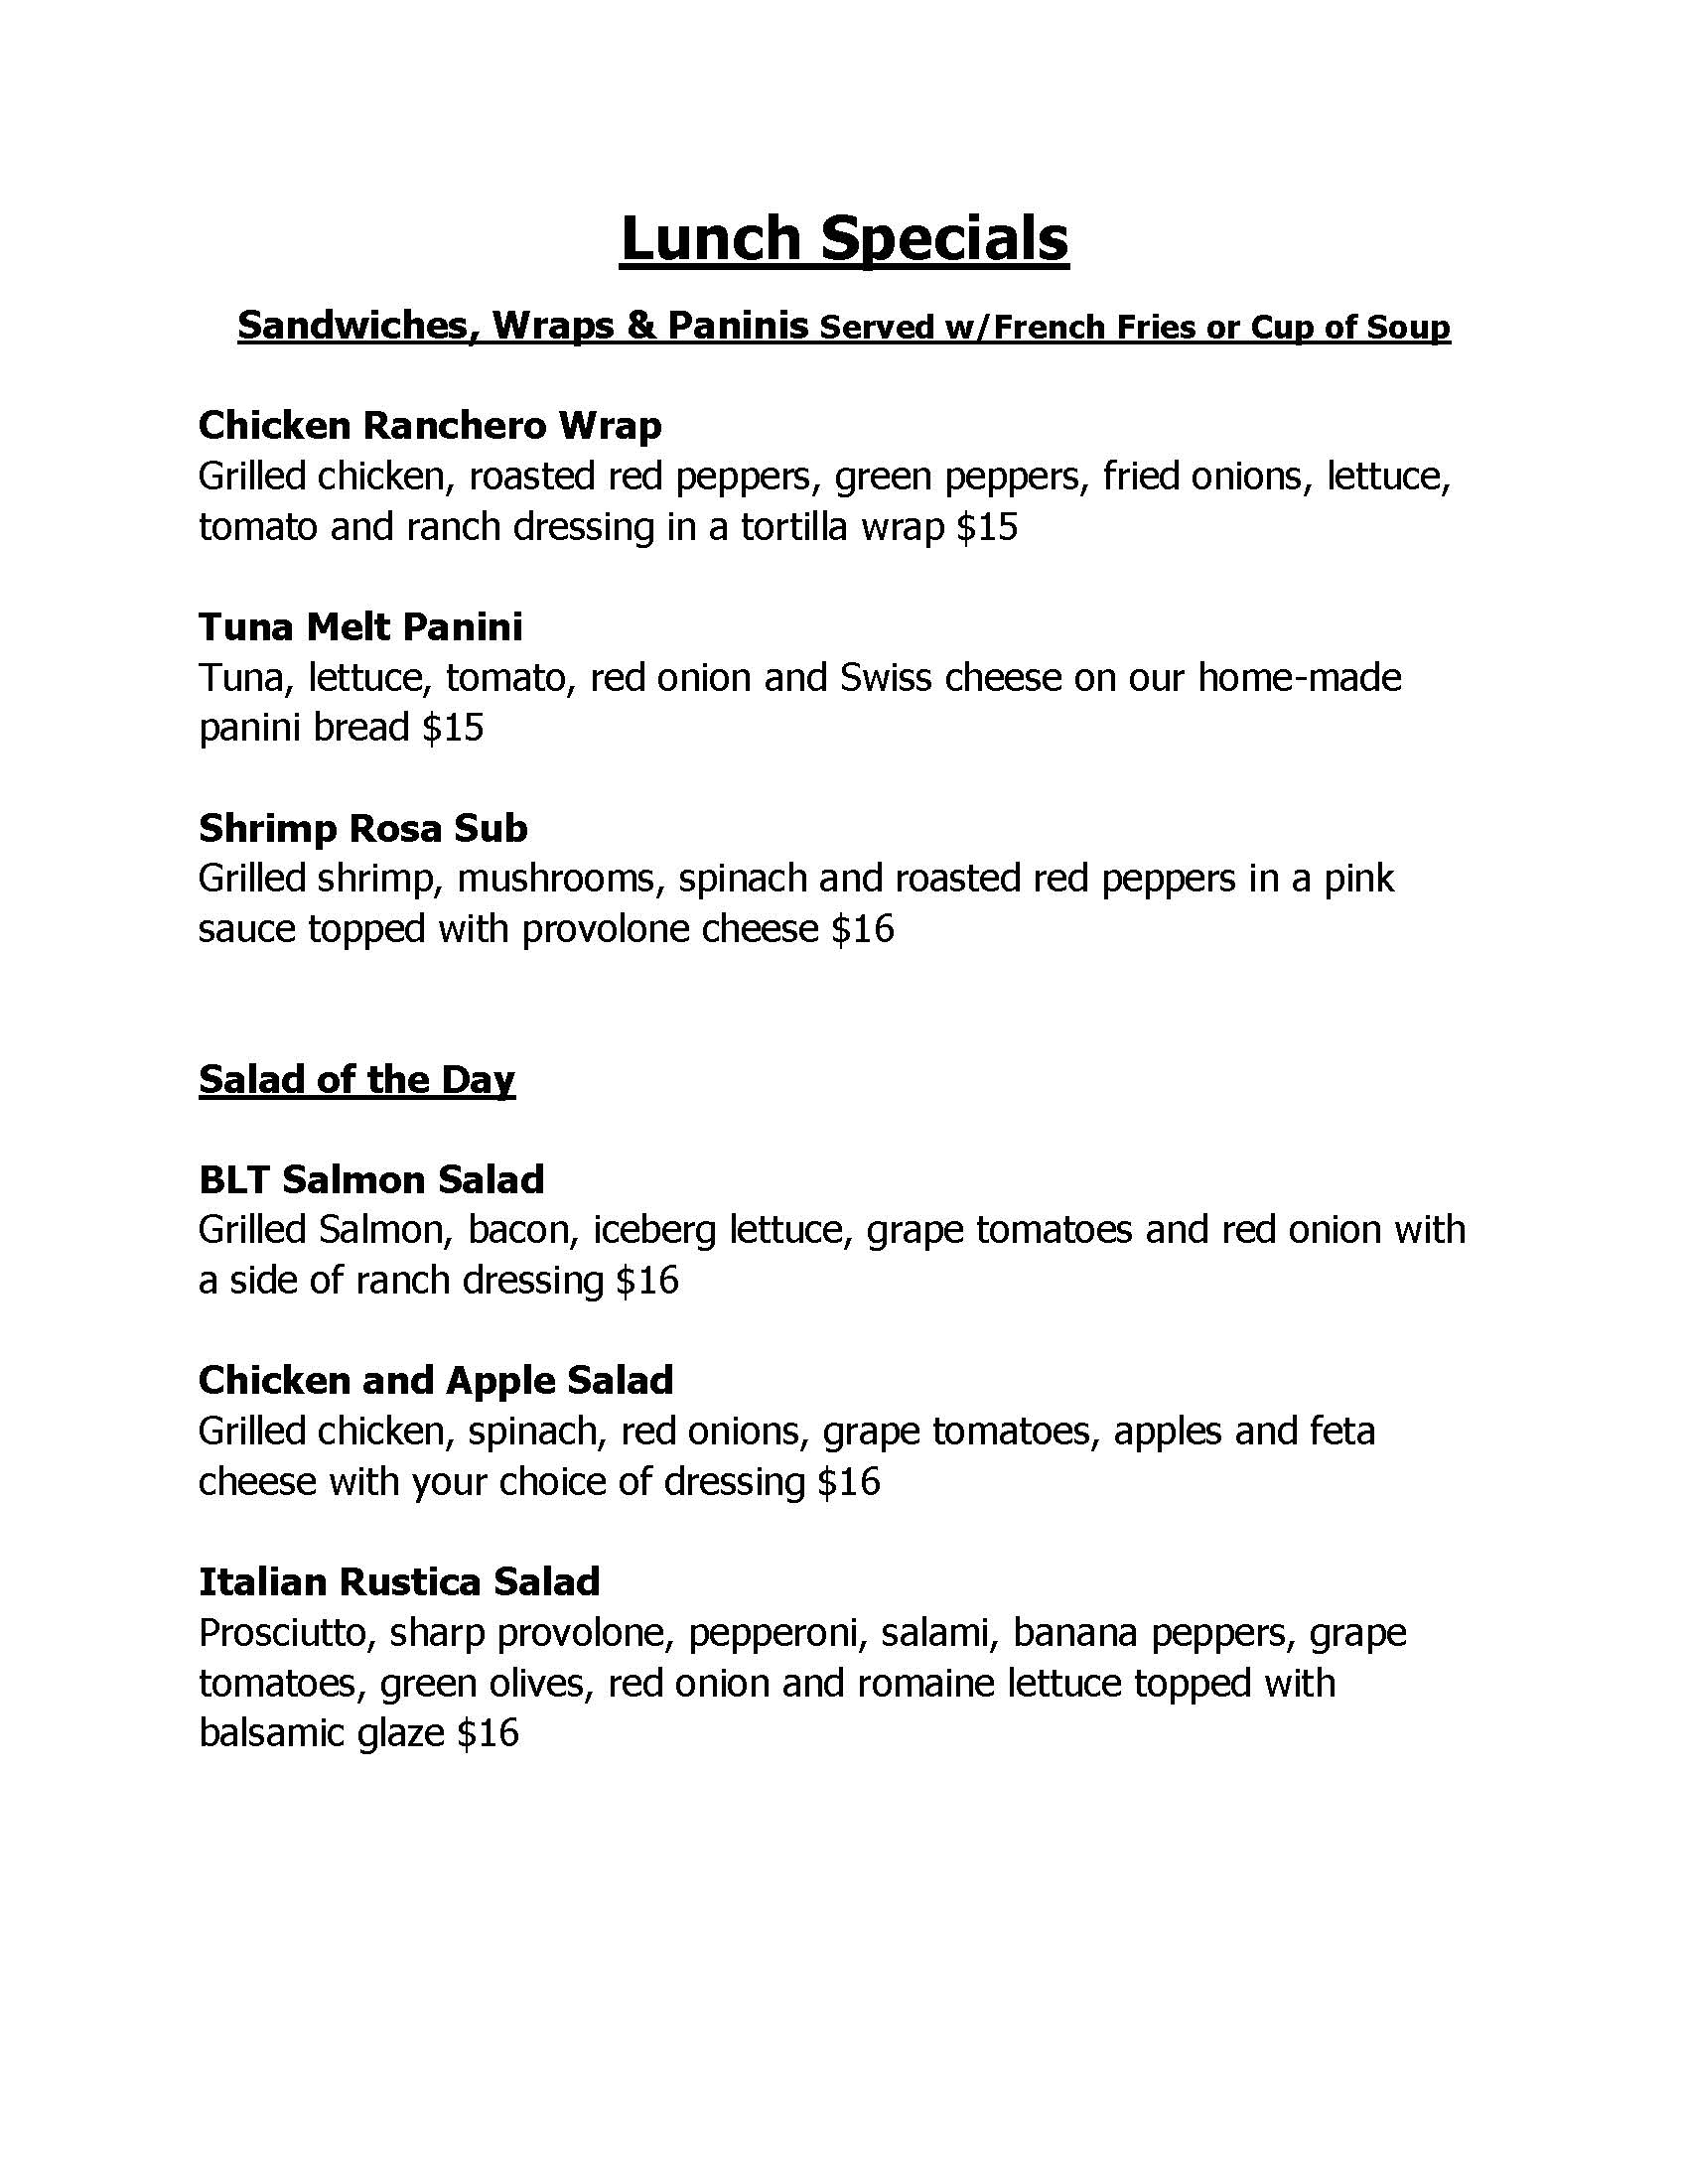 Text document listing lunch specials including various sandwiches, wraps, and salads with pricing information.